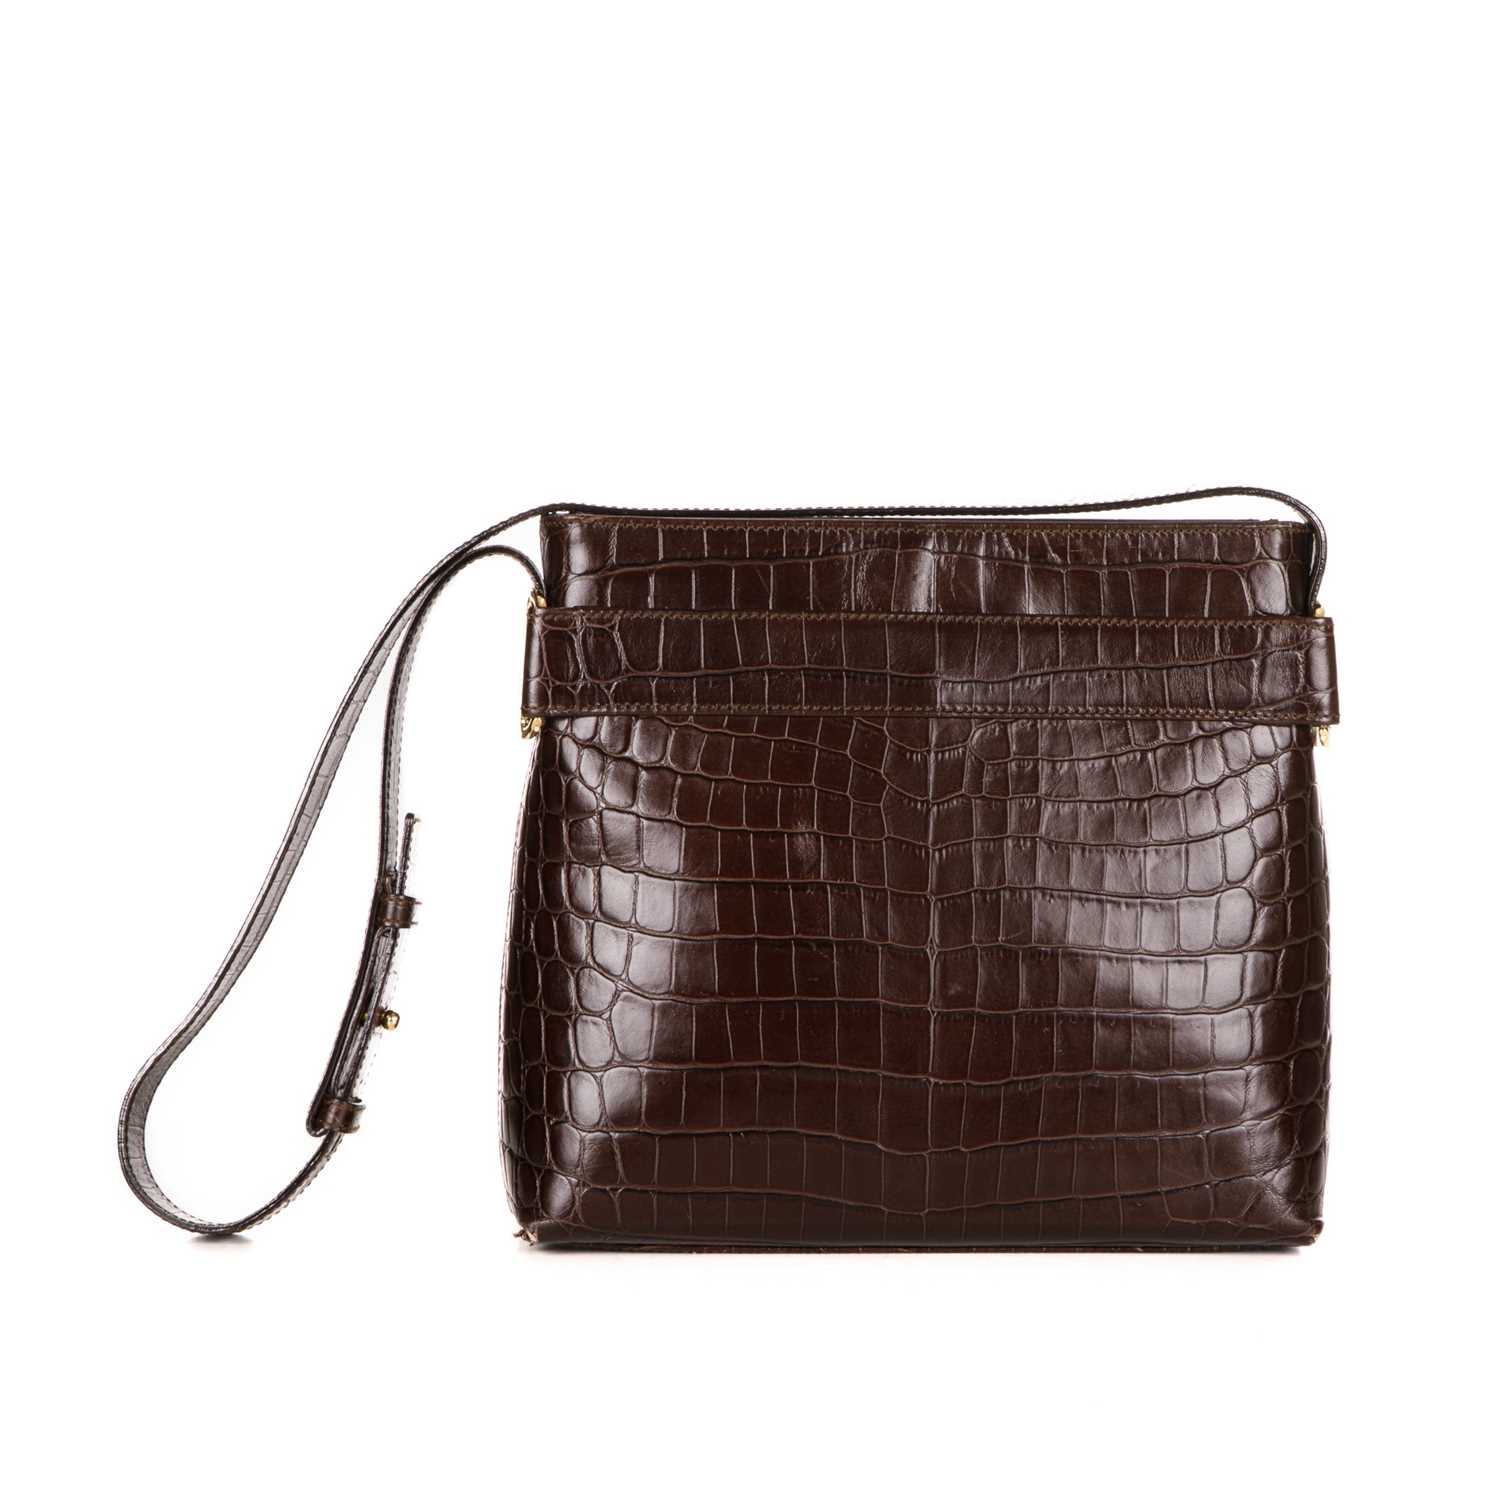 Salvatore Ferragamo, an embossed leather handbag, designed with a brown crocodile embossed leather - Image 2 of 4